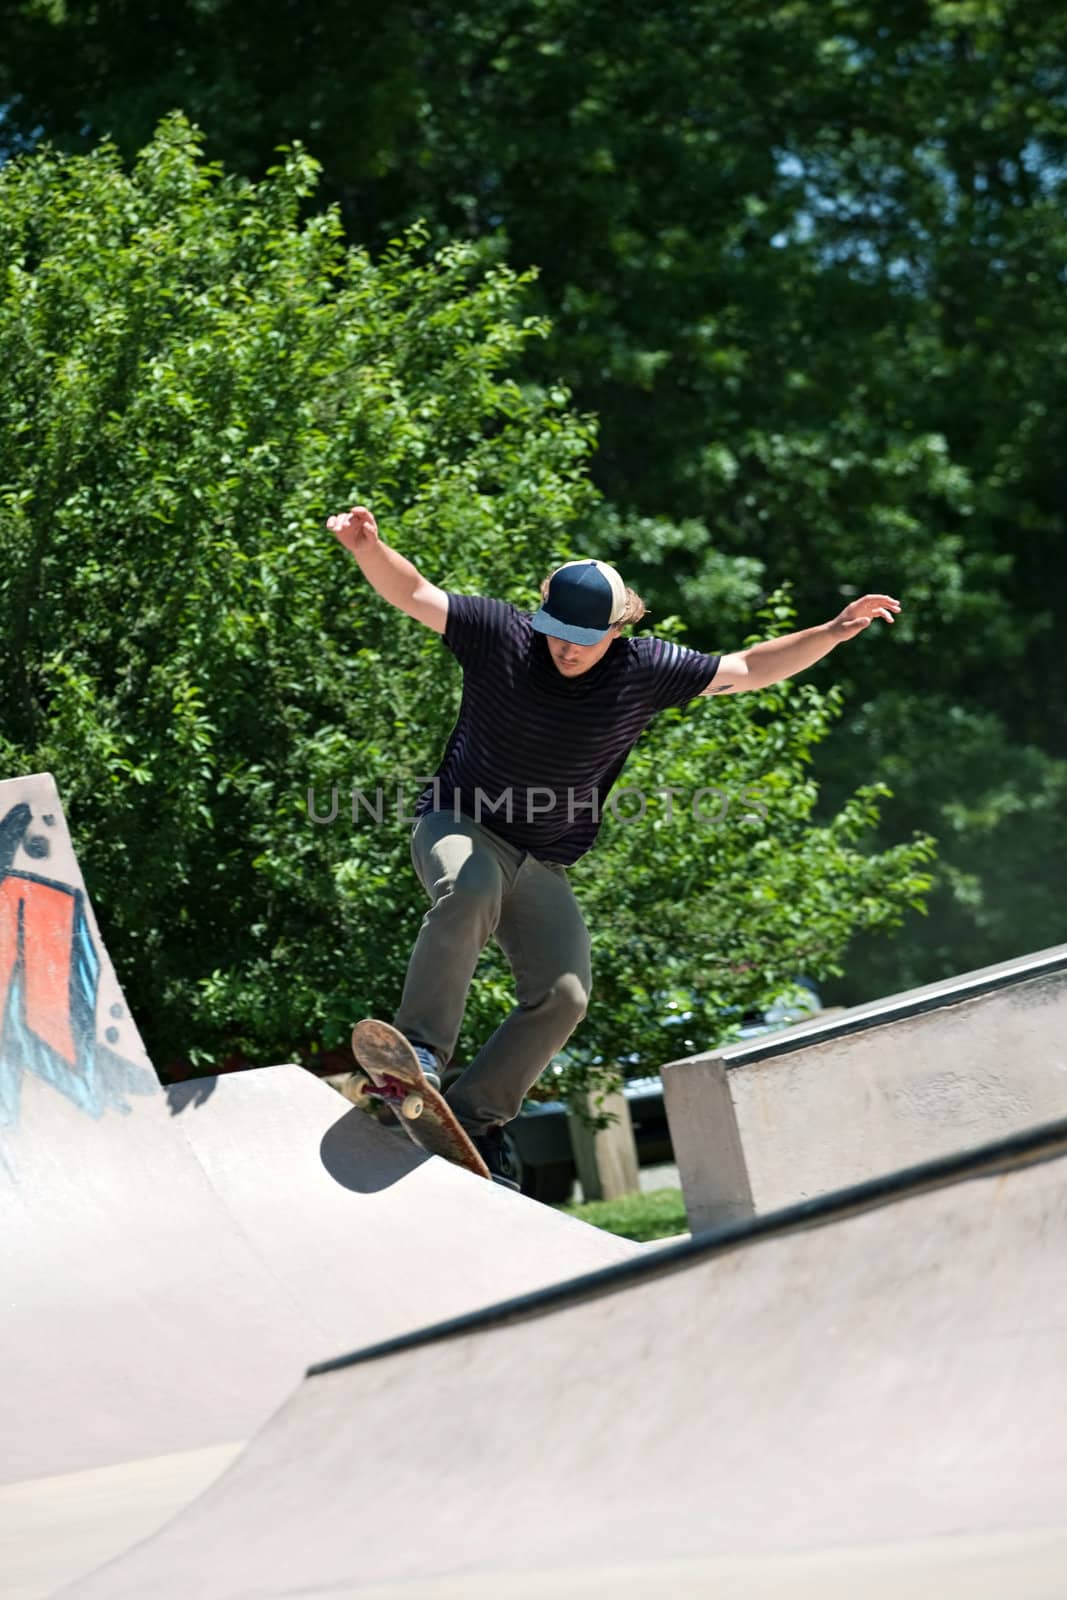 Action shot of a skateboarder going up a concrete skateboarding ramp at the skate park. Shallow depth of field.